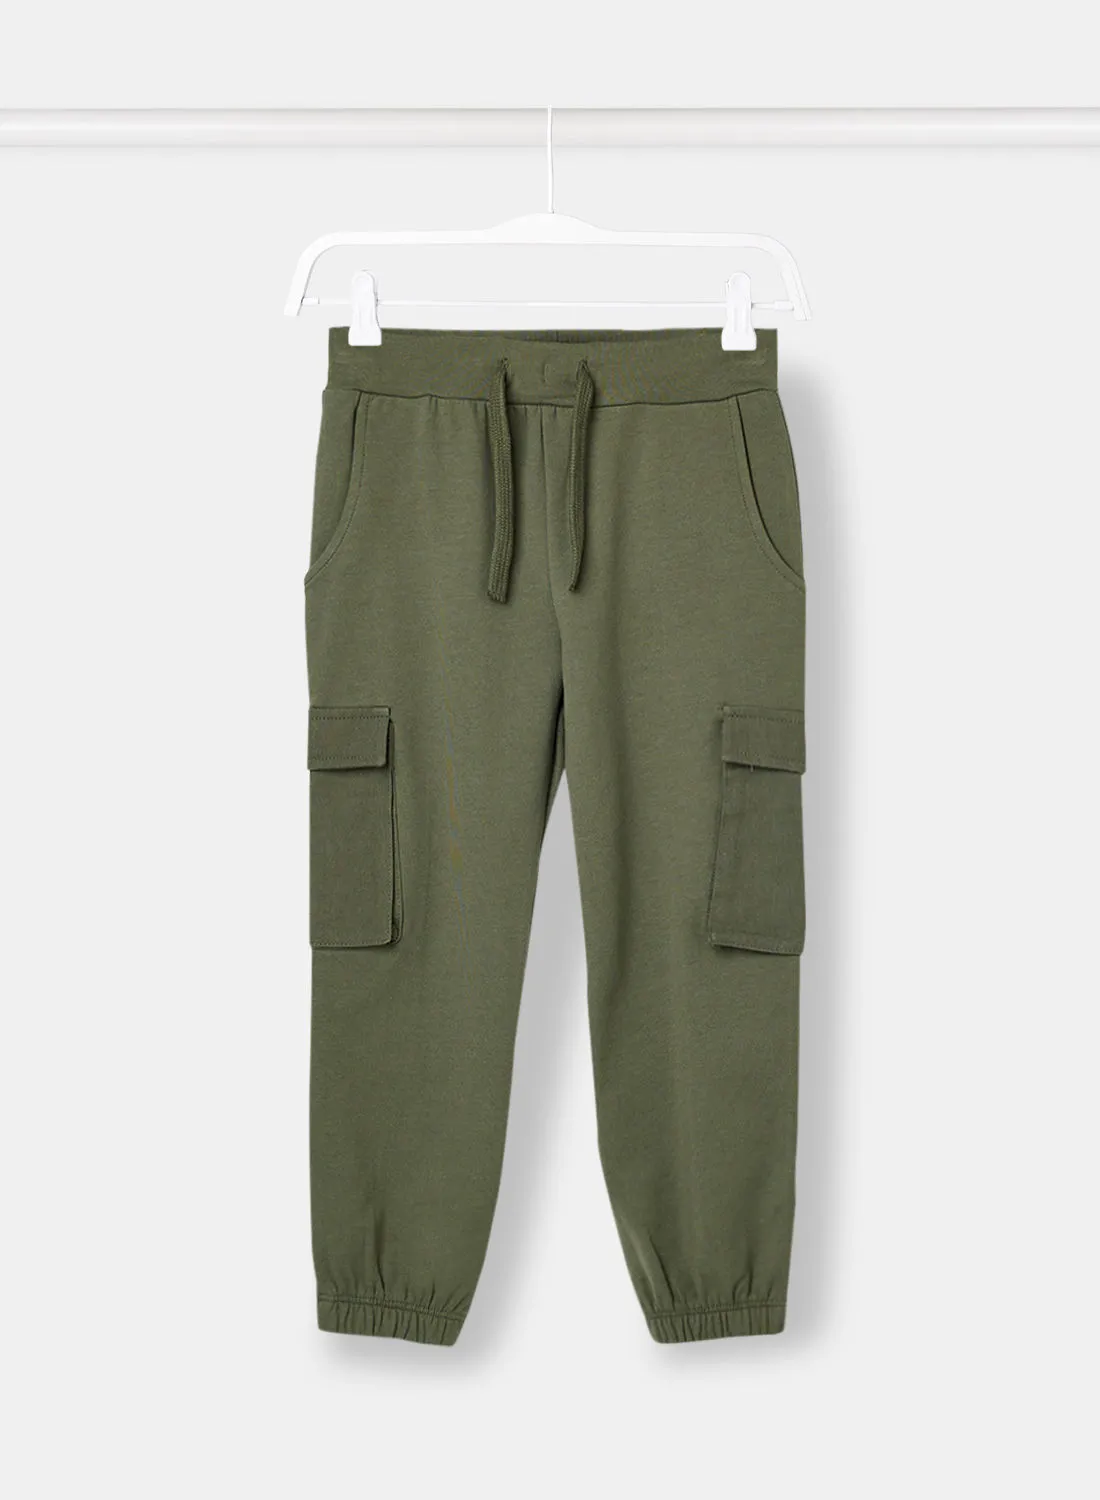 NAME IT Boys Cargo Style Joggers